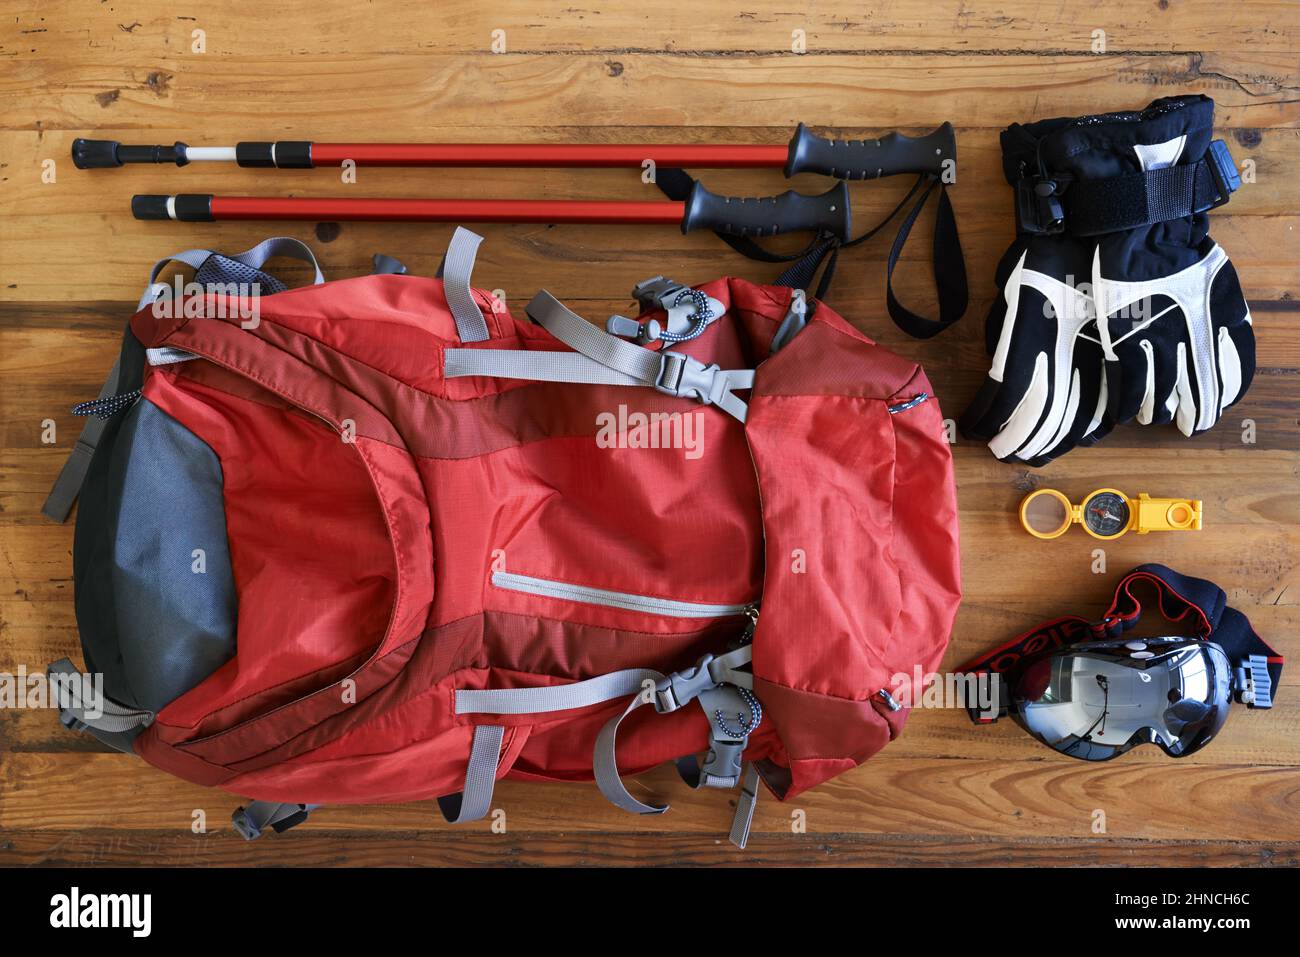 Hiking paraphernalia. Shot of various tools and equipment for a hiker laid out on a table. Stock Photo